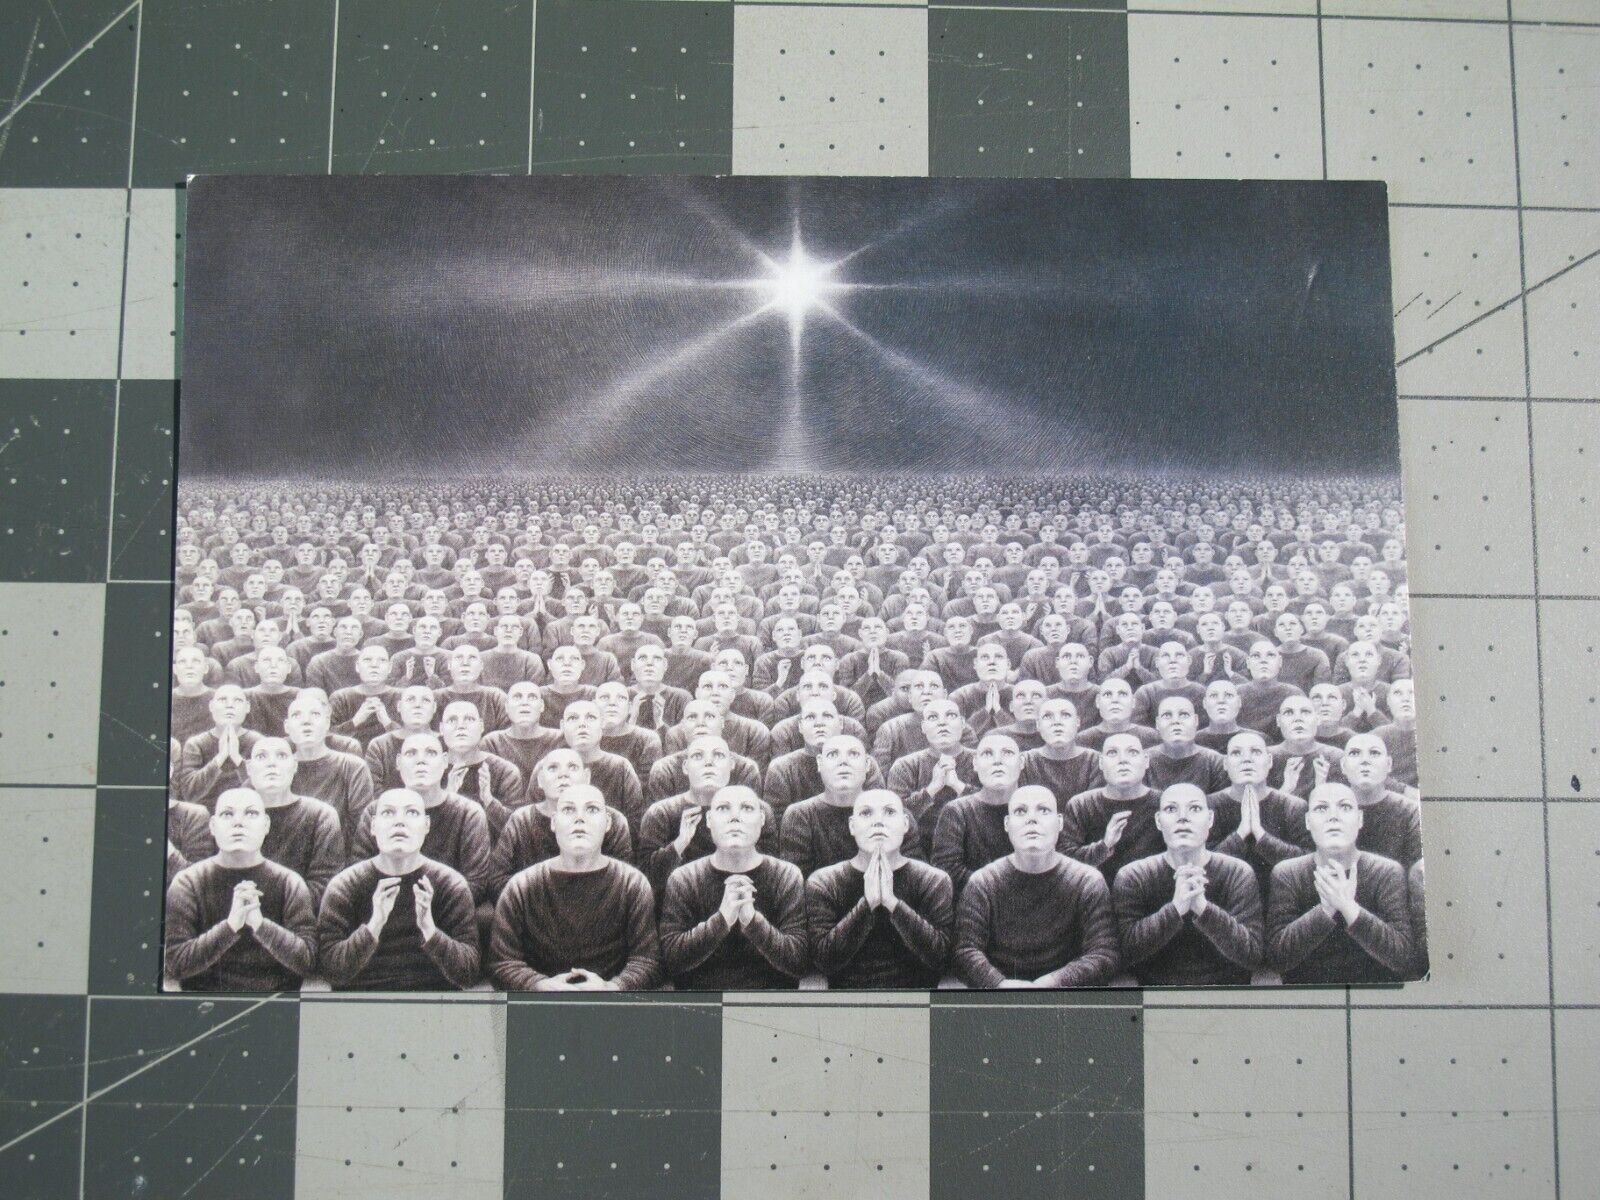 vtg 2010 Laurie Lipton Mass Delusions @ Copro Gallery art show flyer card SUR1